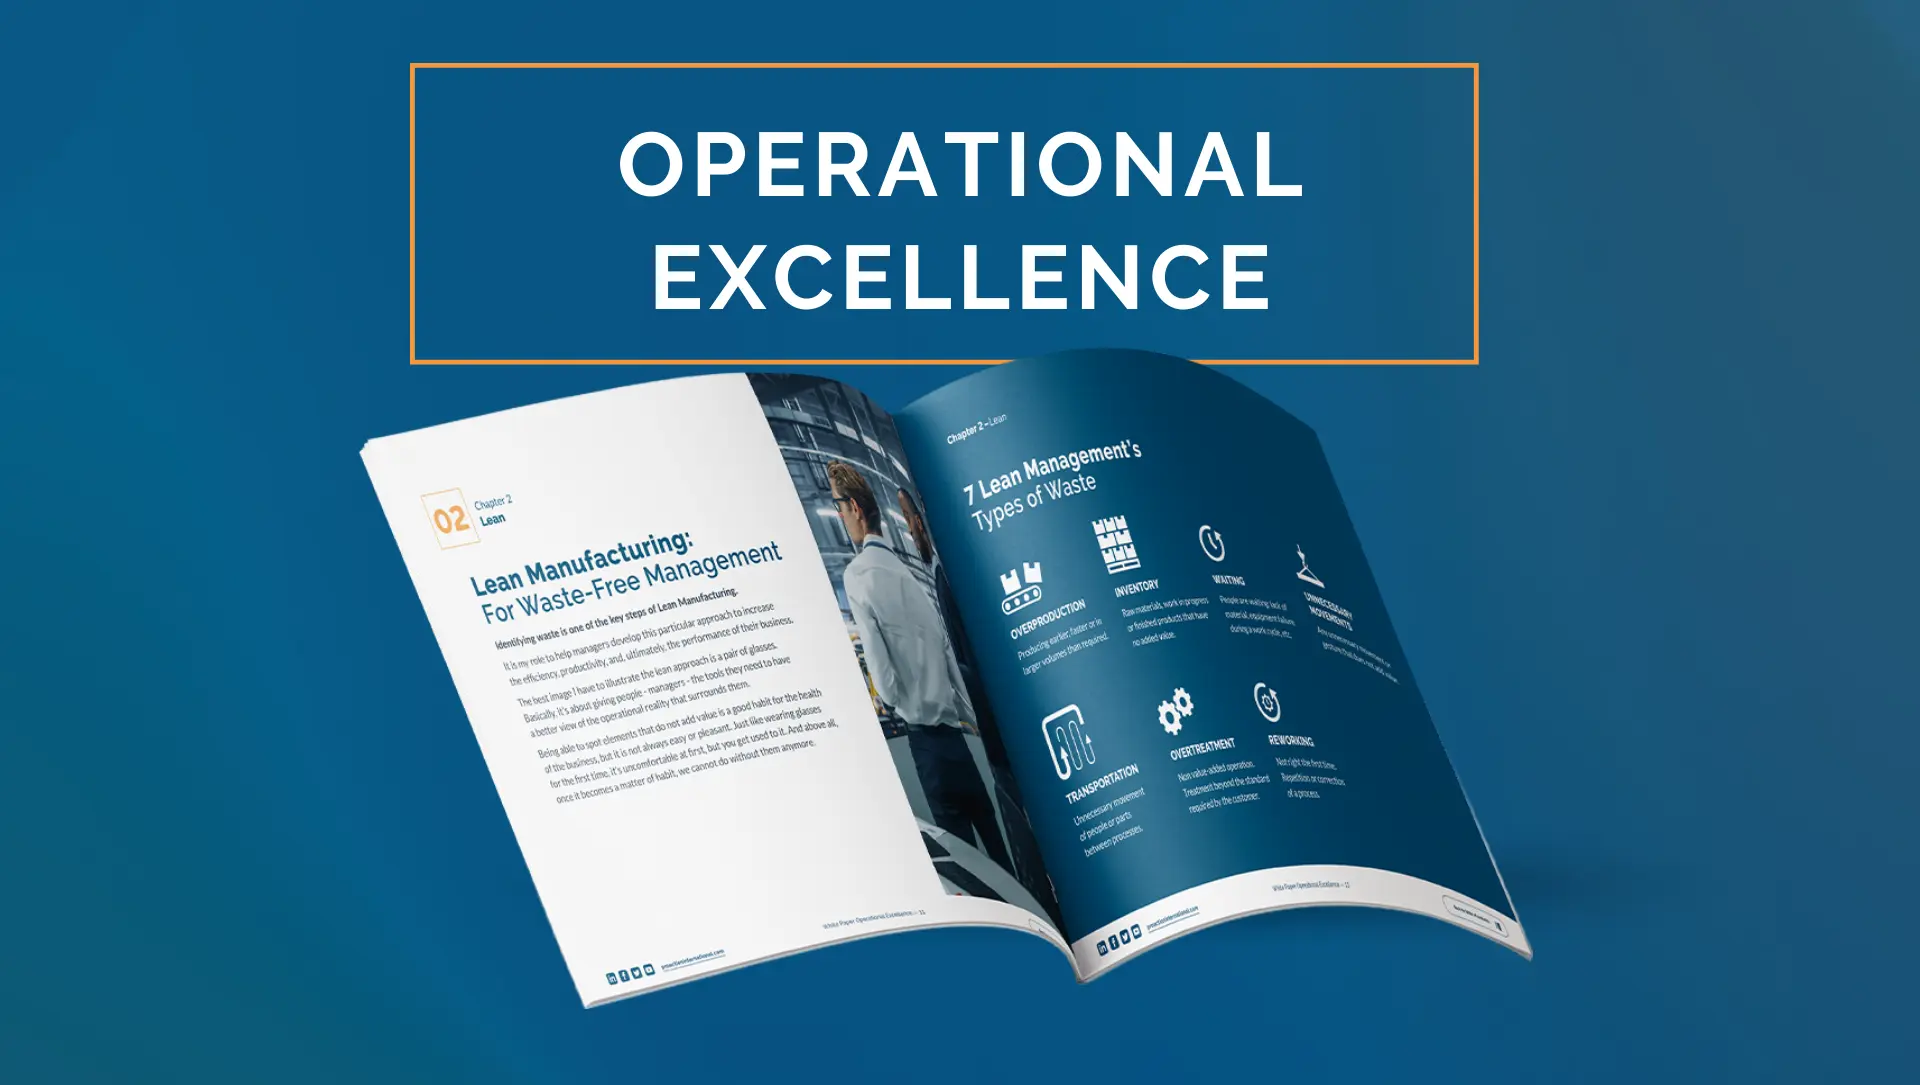 [WHITEPAPER] How to Achieve Operational Excellence